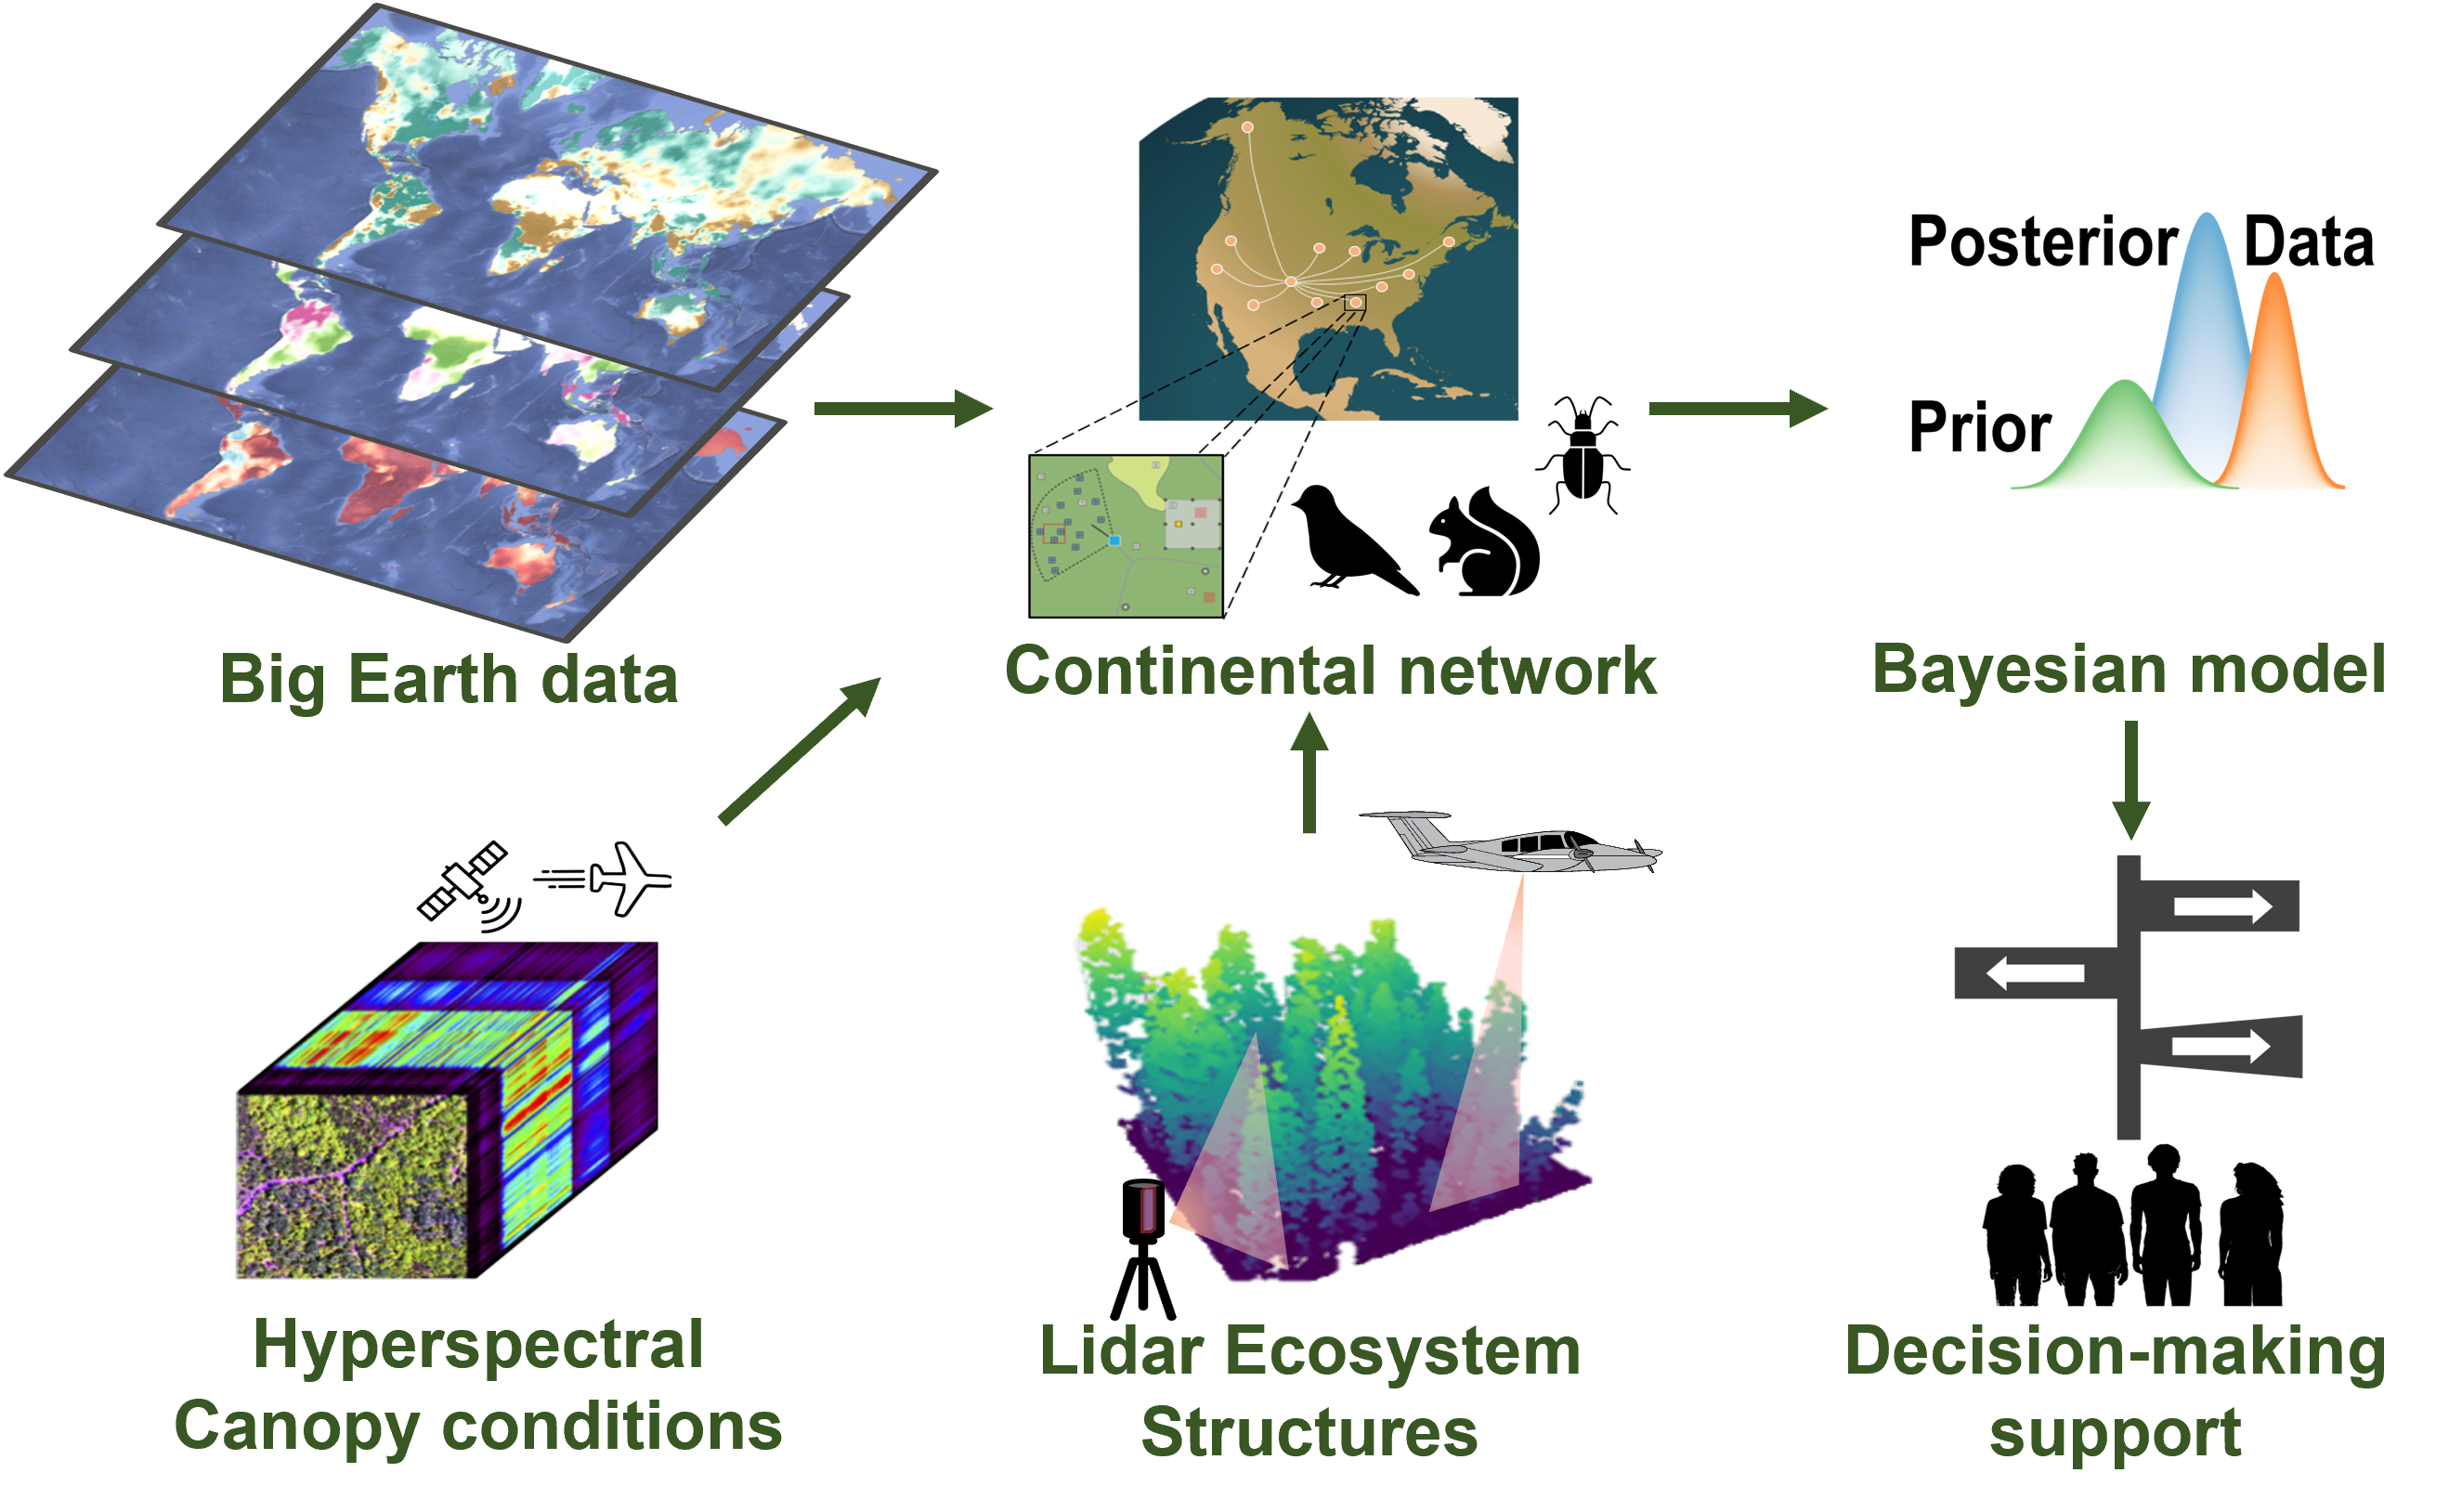 I use big earth data (e.g., climate reanalysis products) and combined lidar and hyperspectral imagery (e.g., 1-m spatial resolution habitat conditions) to study multiple species group (e.g., ground beetles, herbaceous, and trees) at [National Ecological Observation Network](https://www.neonscience.org/).